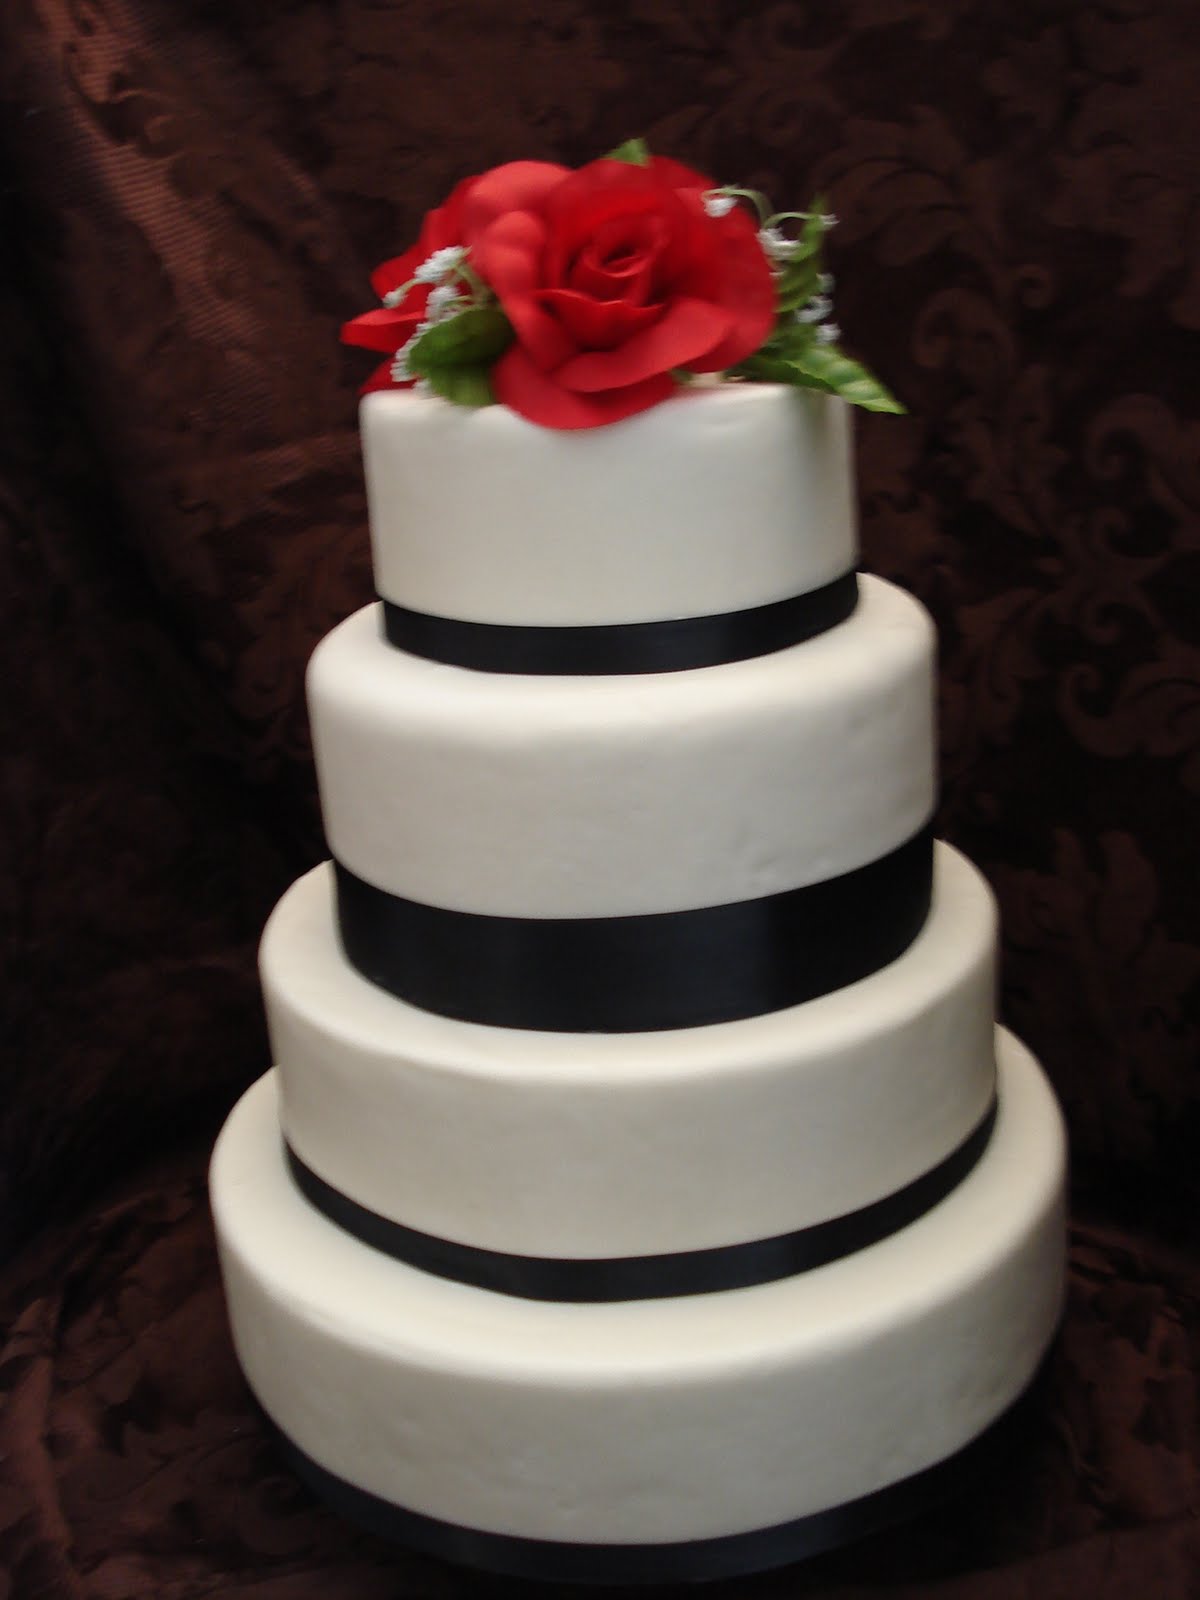 Black and red wedding cake.